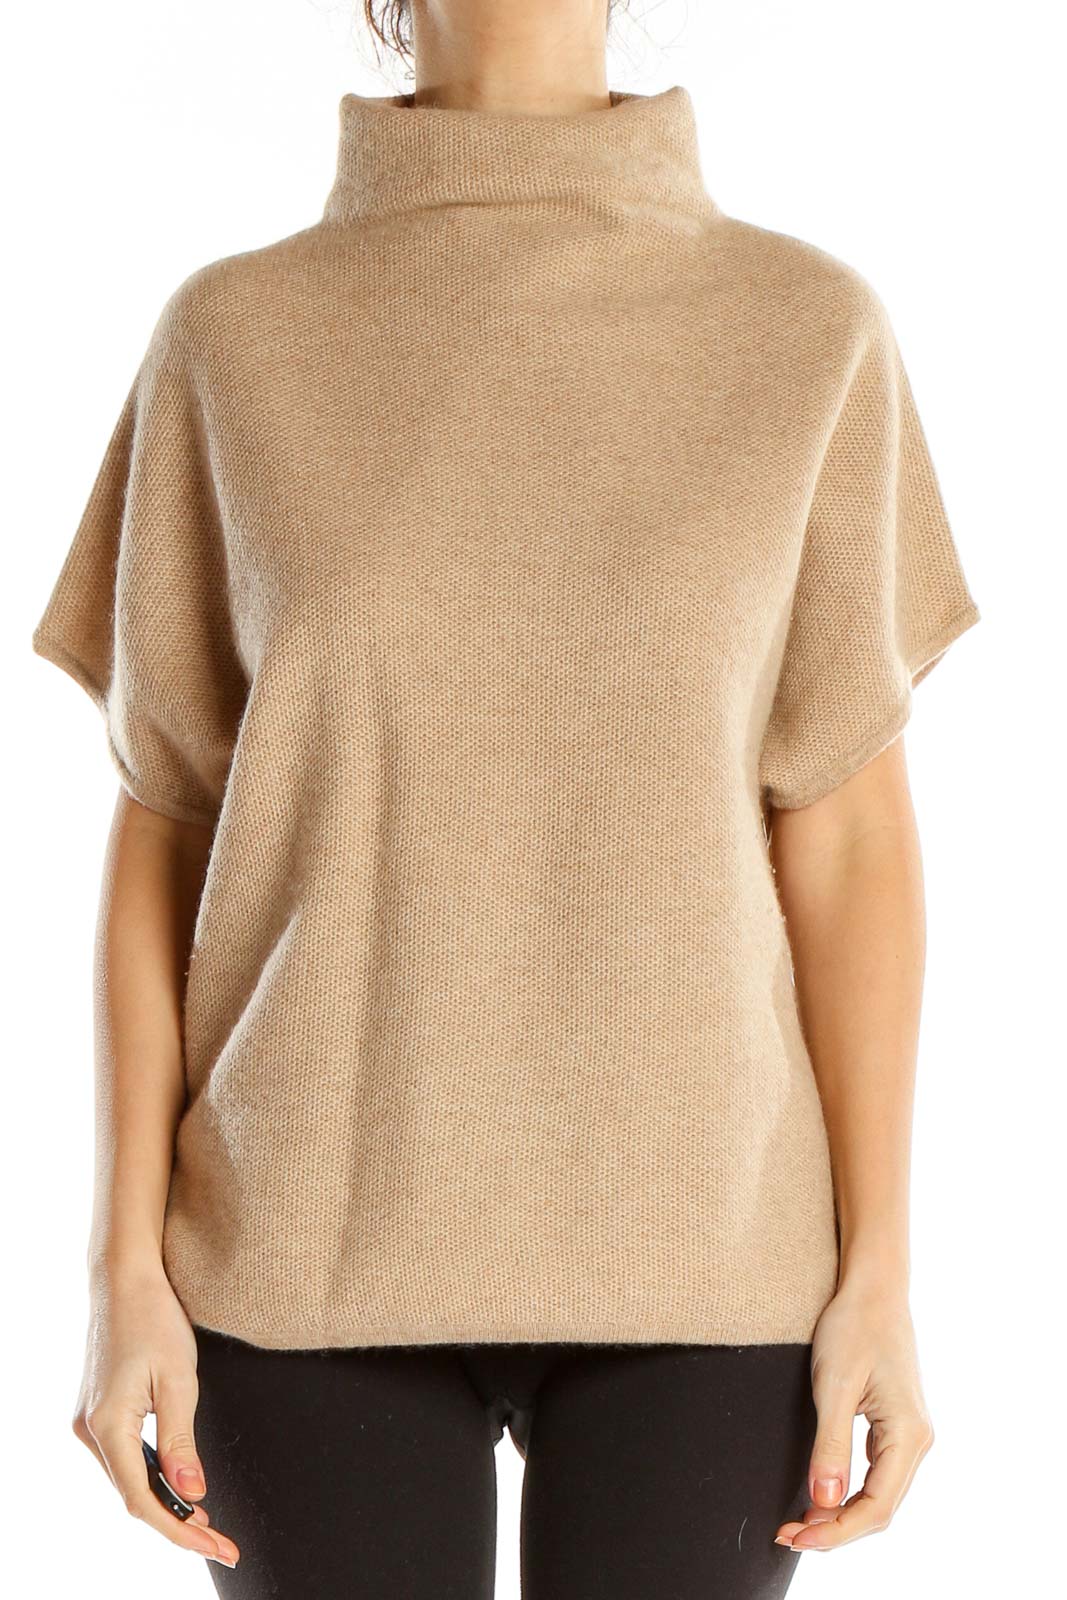 Brown All Day Wear High Neck Sweater Front